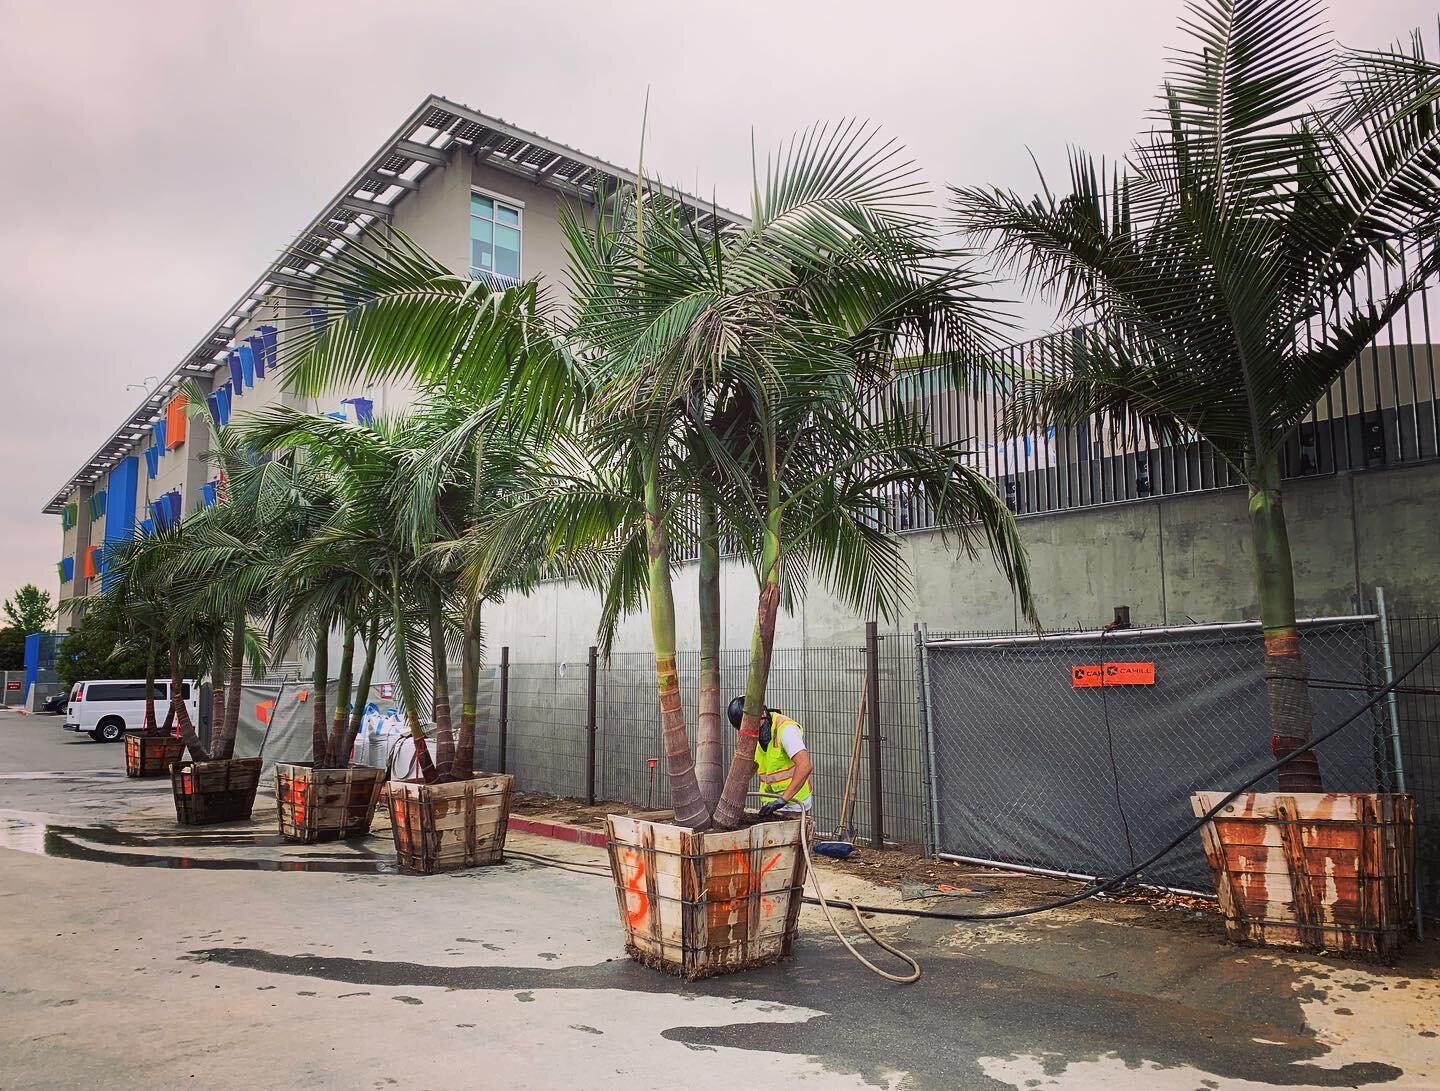 It was not easy finding these King Palms, but they are going to transform the courtyard at this affordable housing project in #baymeadows #archontophoenixcunninghamiana #palms #landscapearchitecture #shedlandscapearchitecture